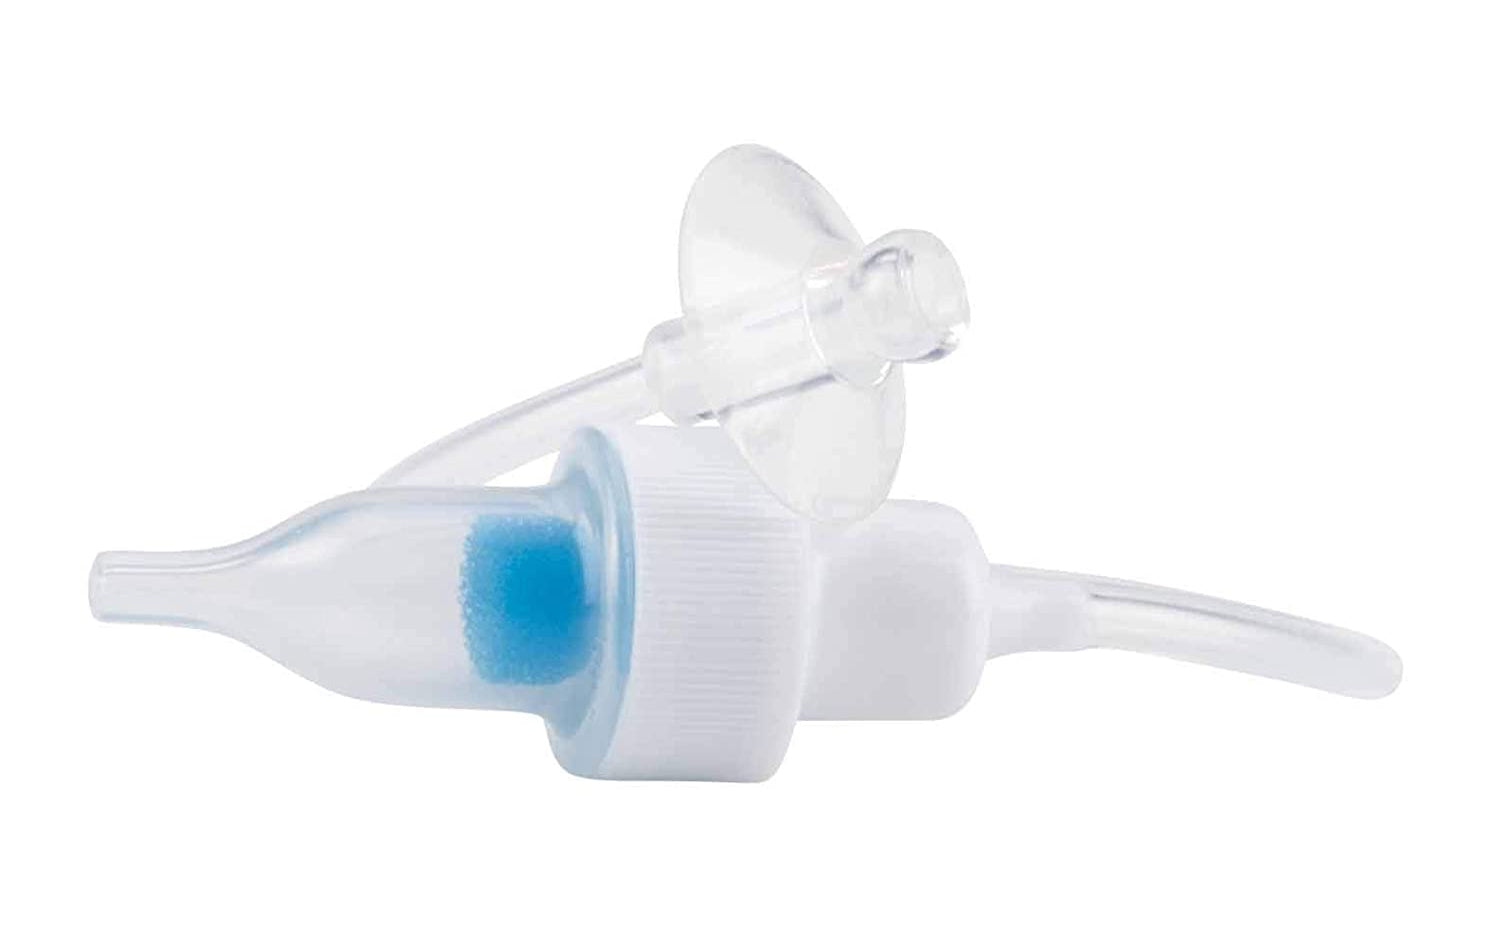 Nuby Baby Nasal Aspirator Suction Nose Decongestion Immediate Relief BPA  Free